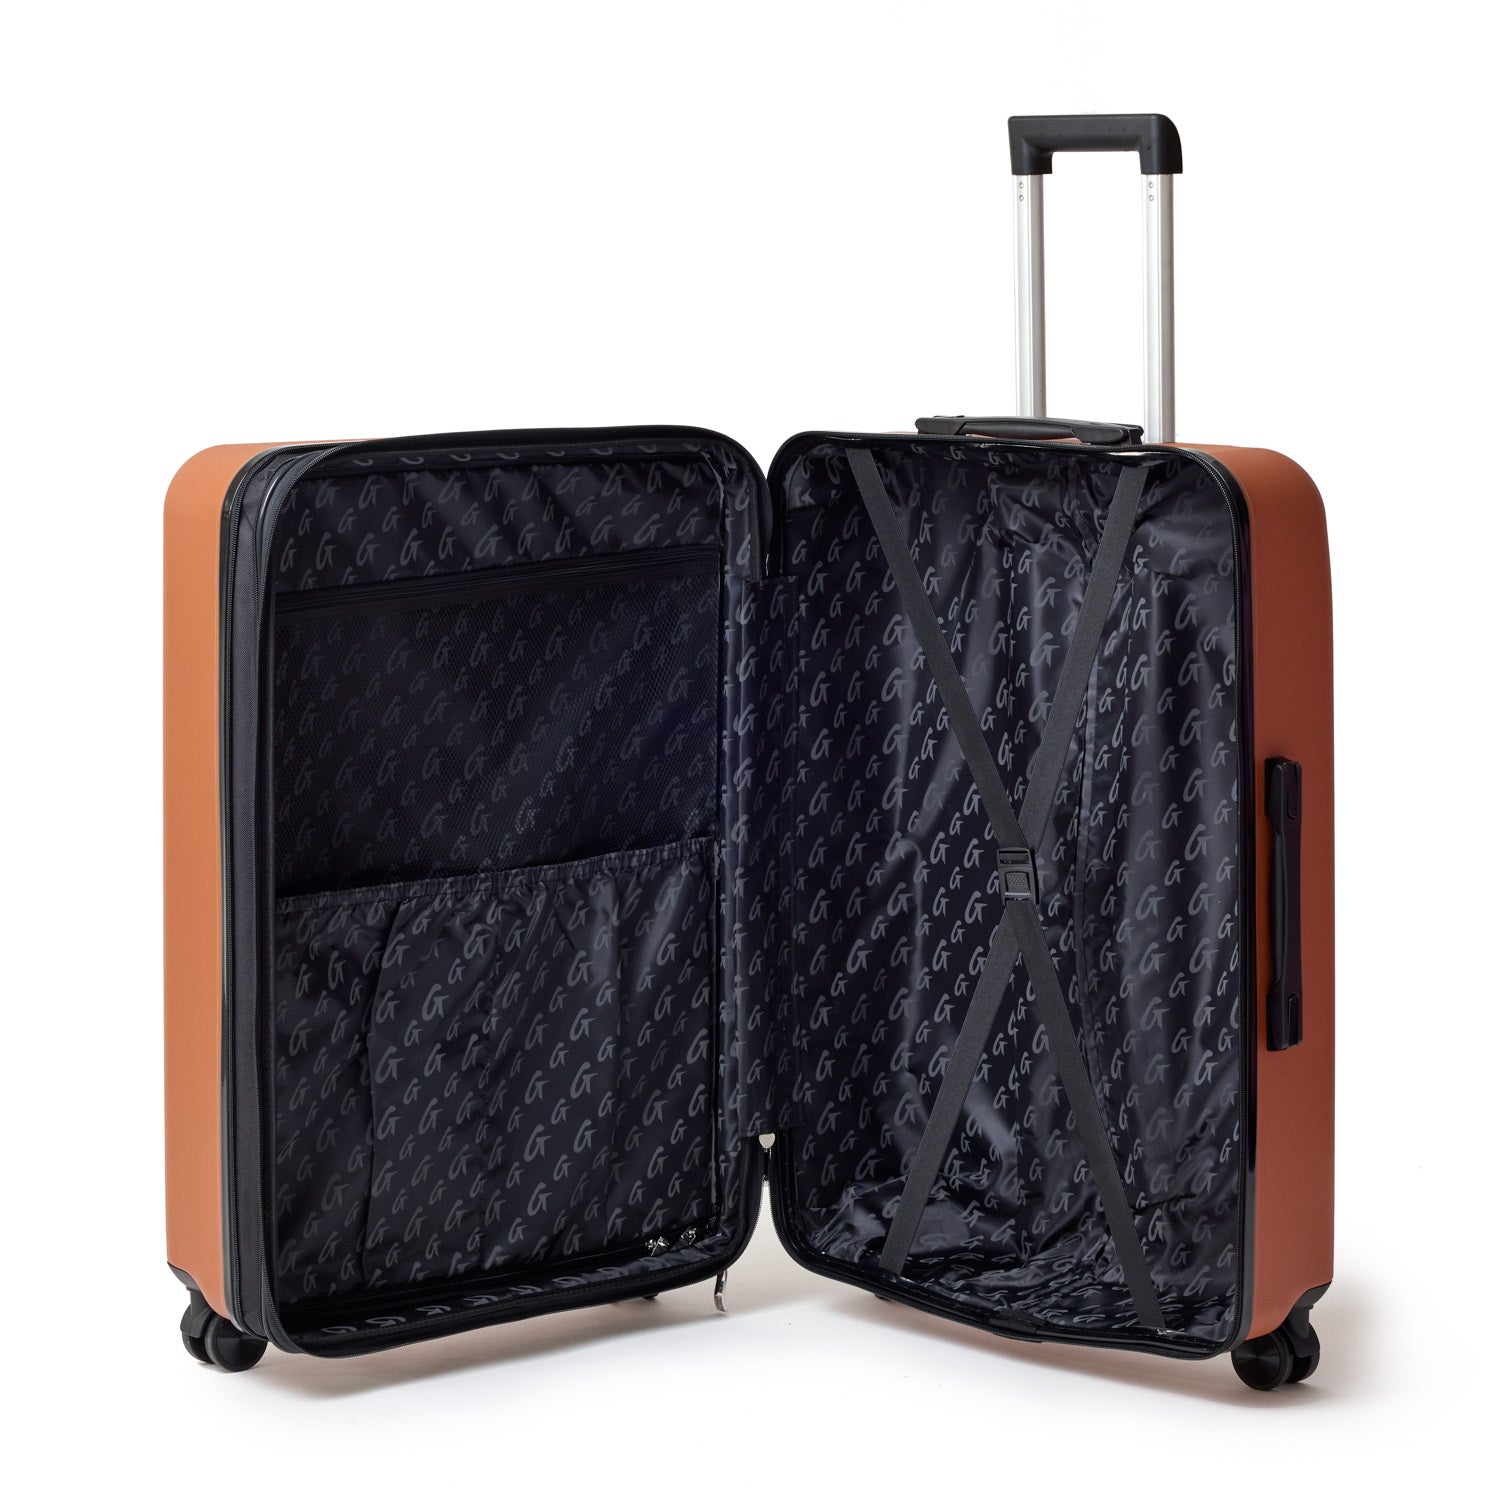 LARGE CHECKED LUGGAGE BROWN